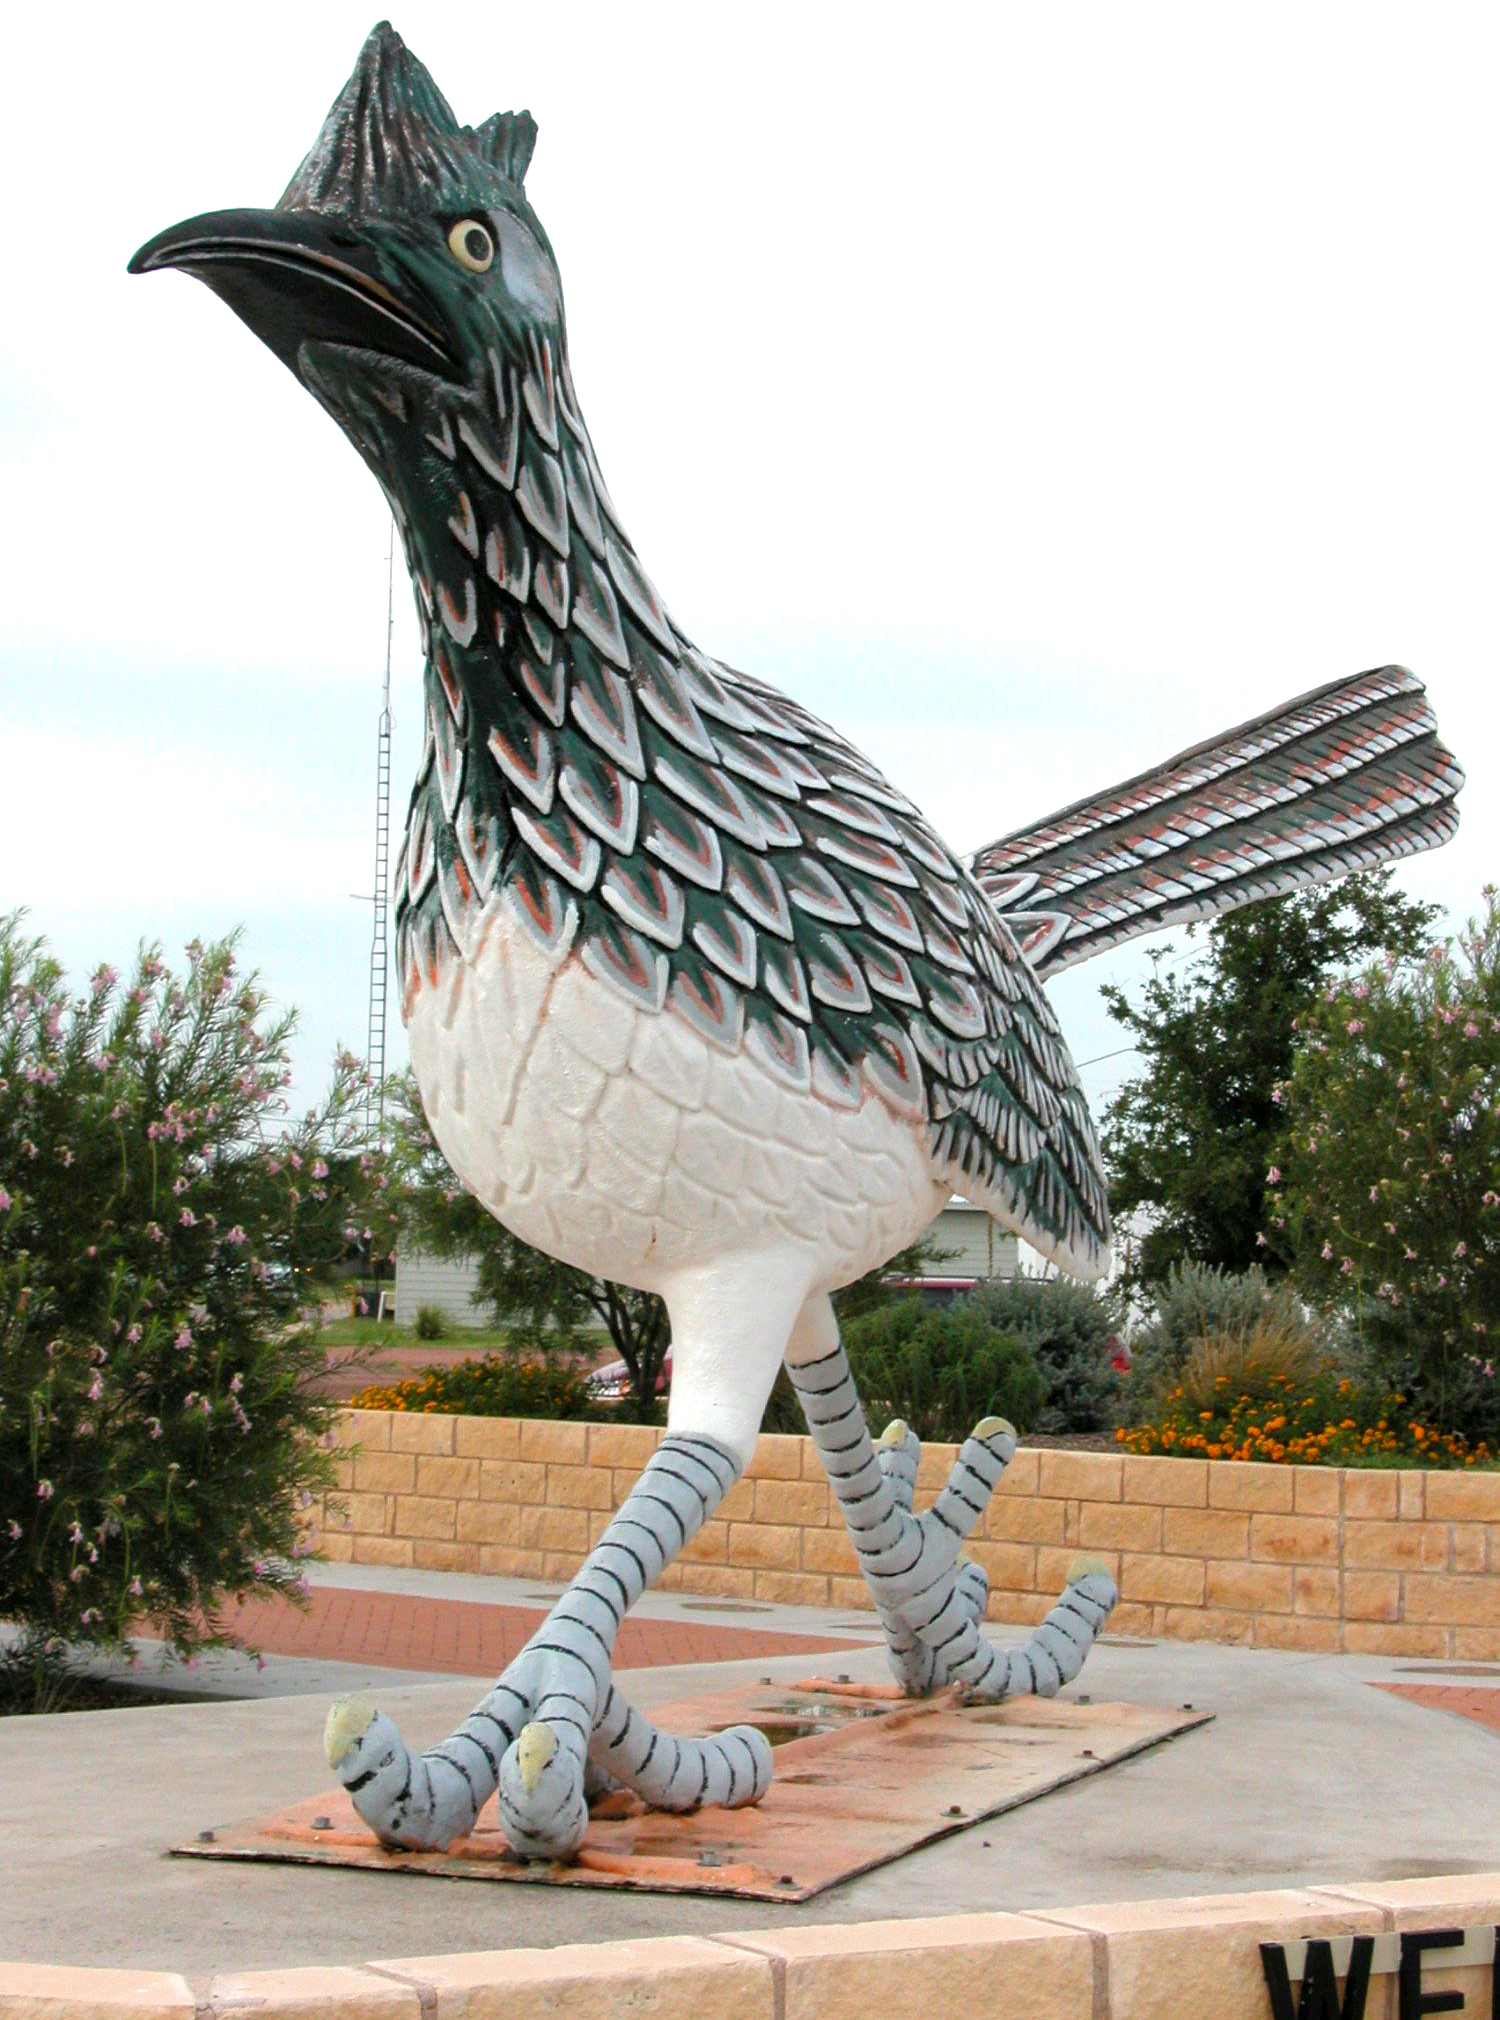 World's largest roadrunner: Paisano Pete in Fort Stockton, Texas, sets world record